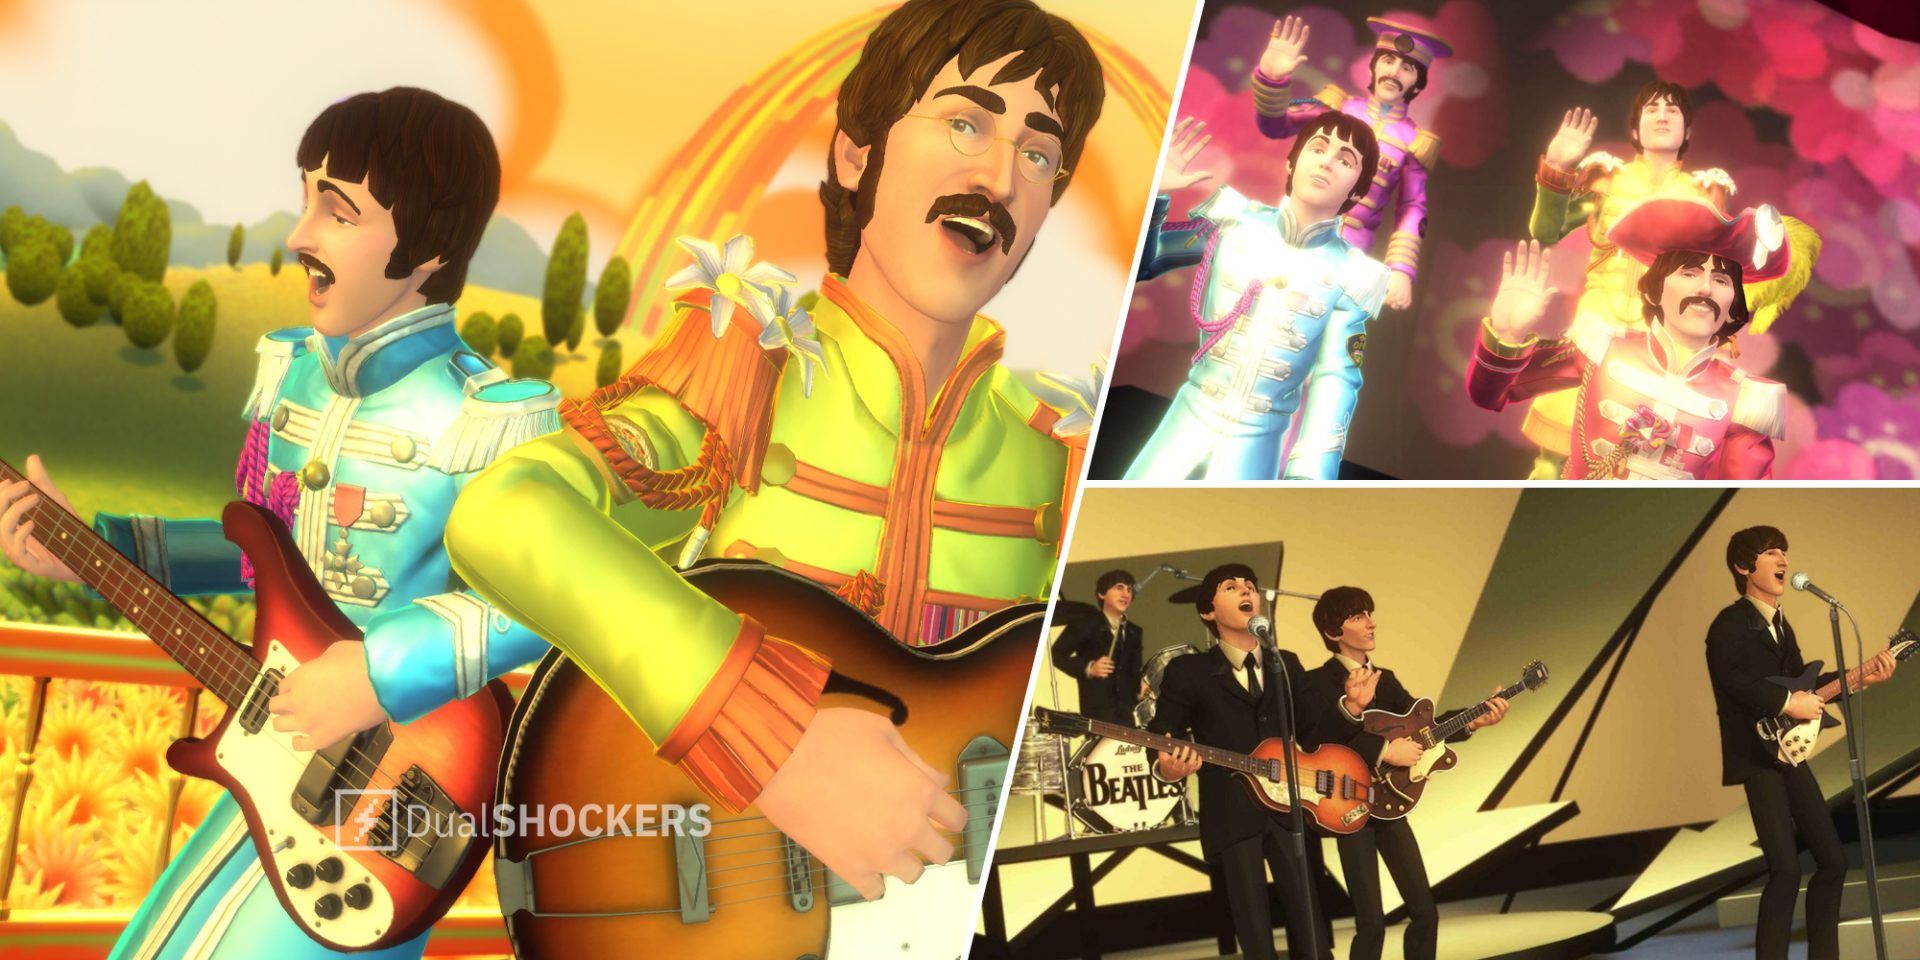 The Beatles in Sgt. Pepper's Lonely Hearts Club Band outfits on left and top right, The Beatles performing on stage on bottom right